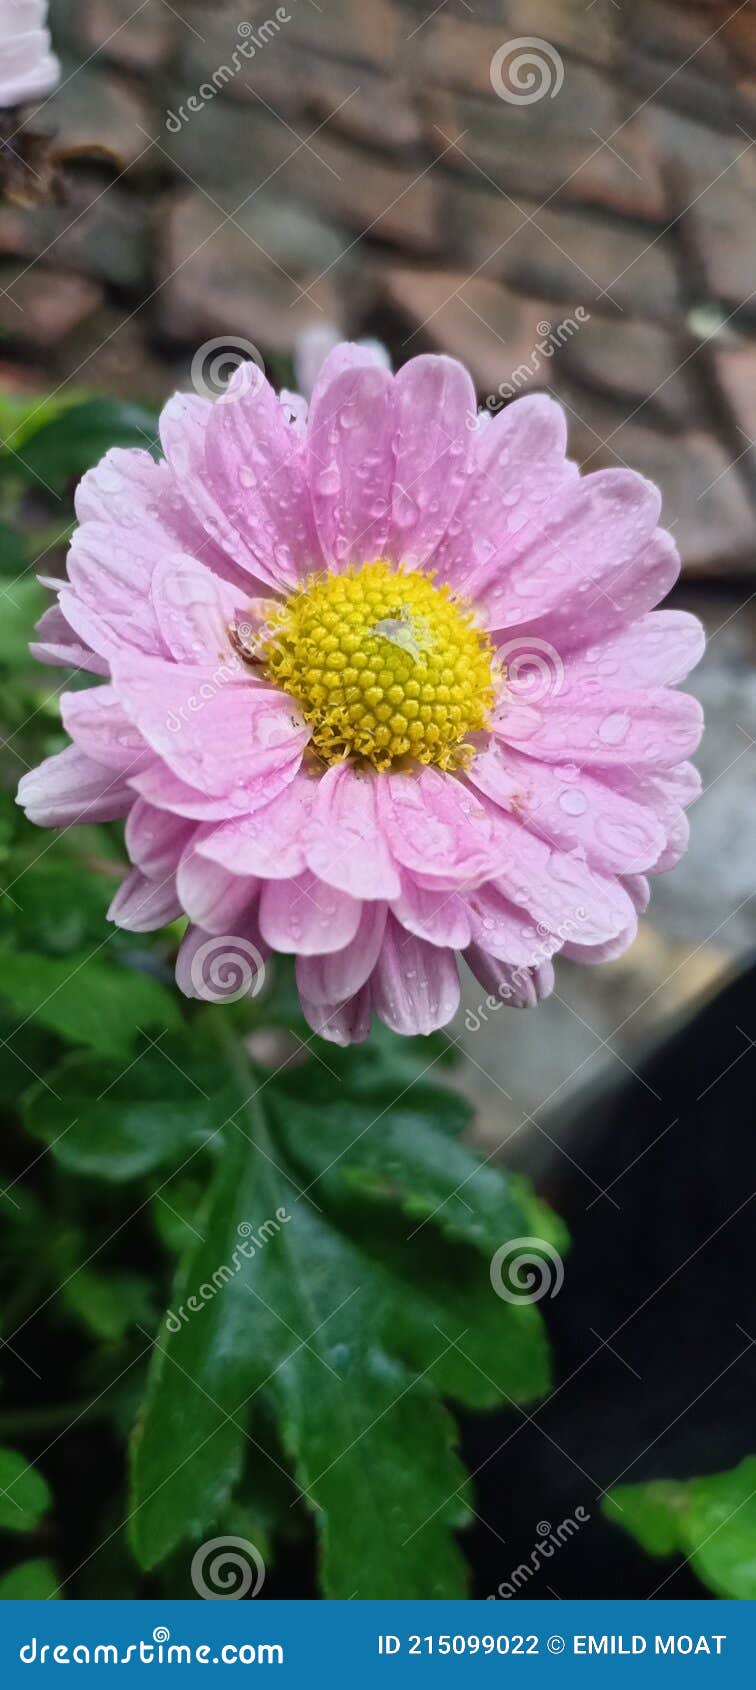 the beauty of the chrysanthemum when it bloomsÃ¯Â¿Â¼